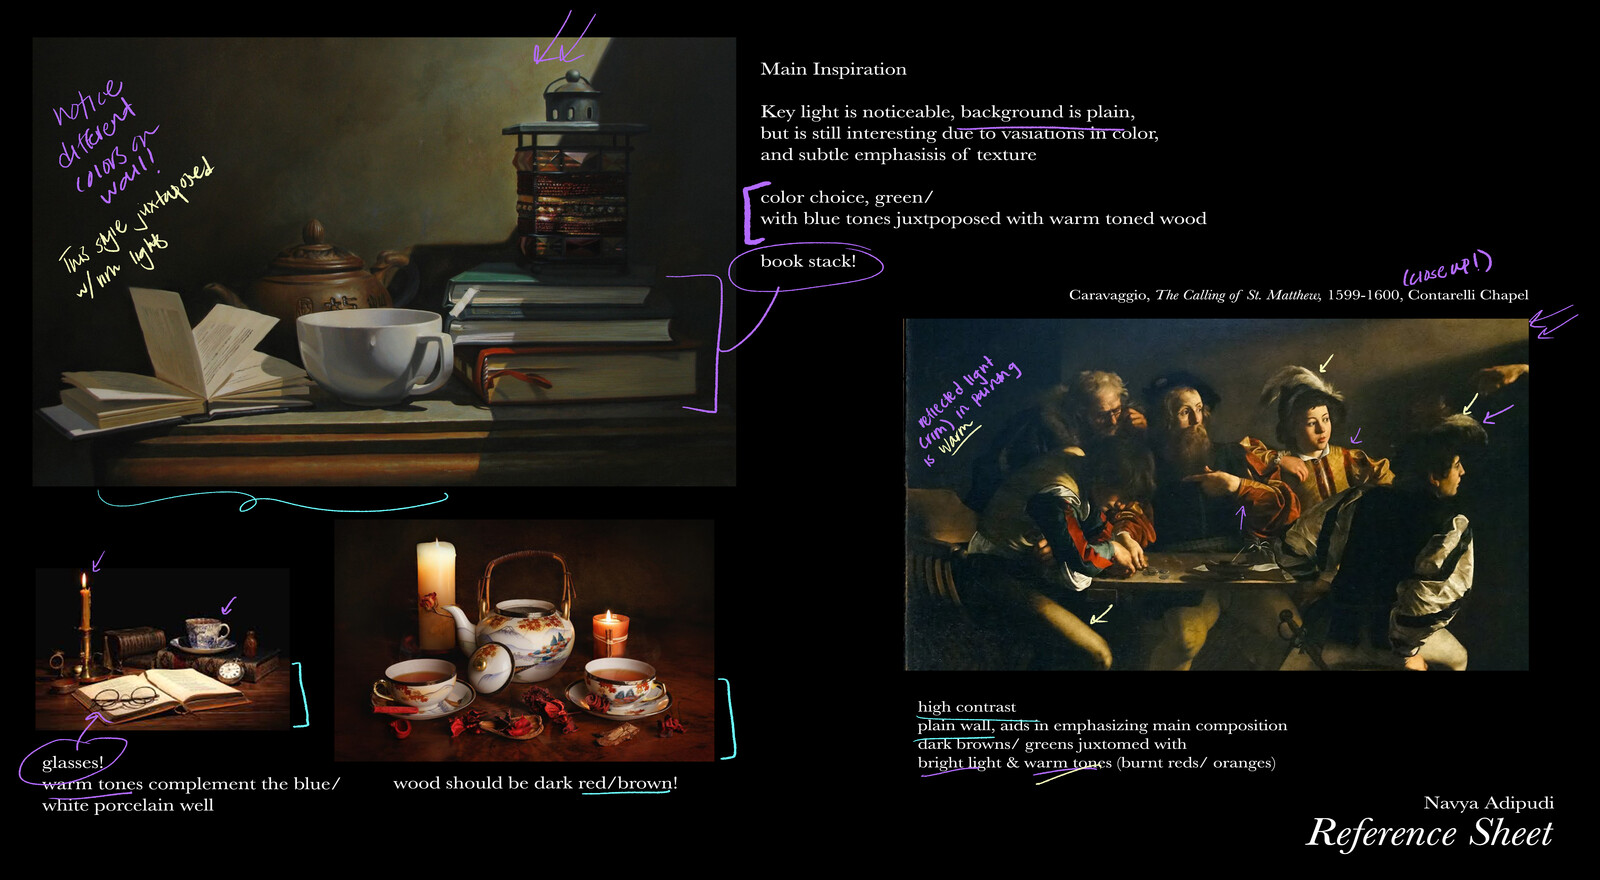 Reference Sheet/ Influences from Caravaggio, and other still life paintings